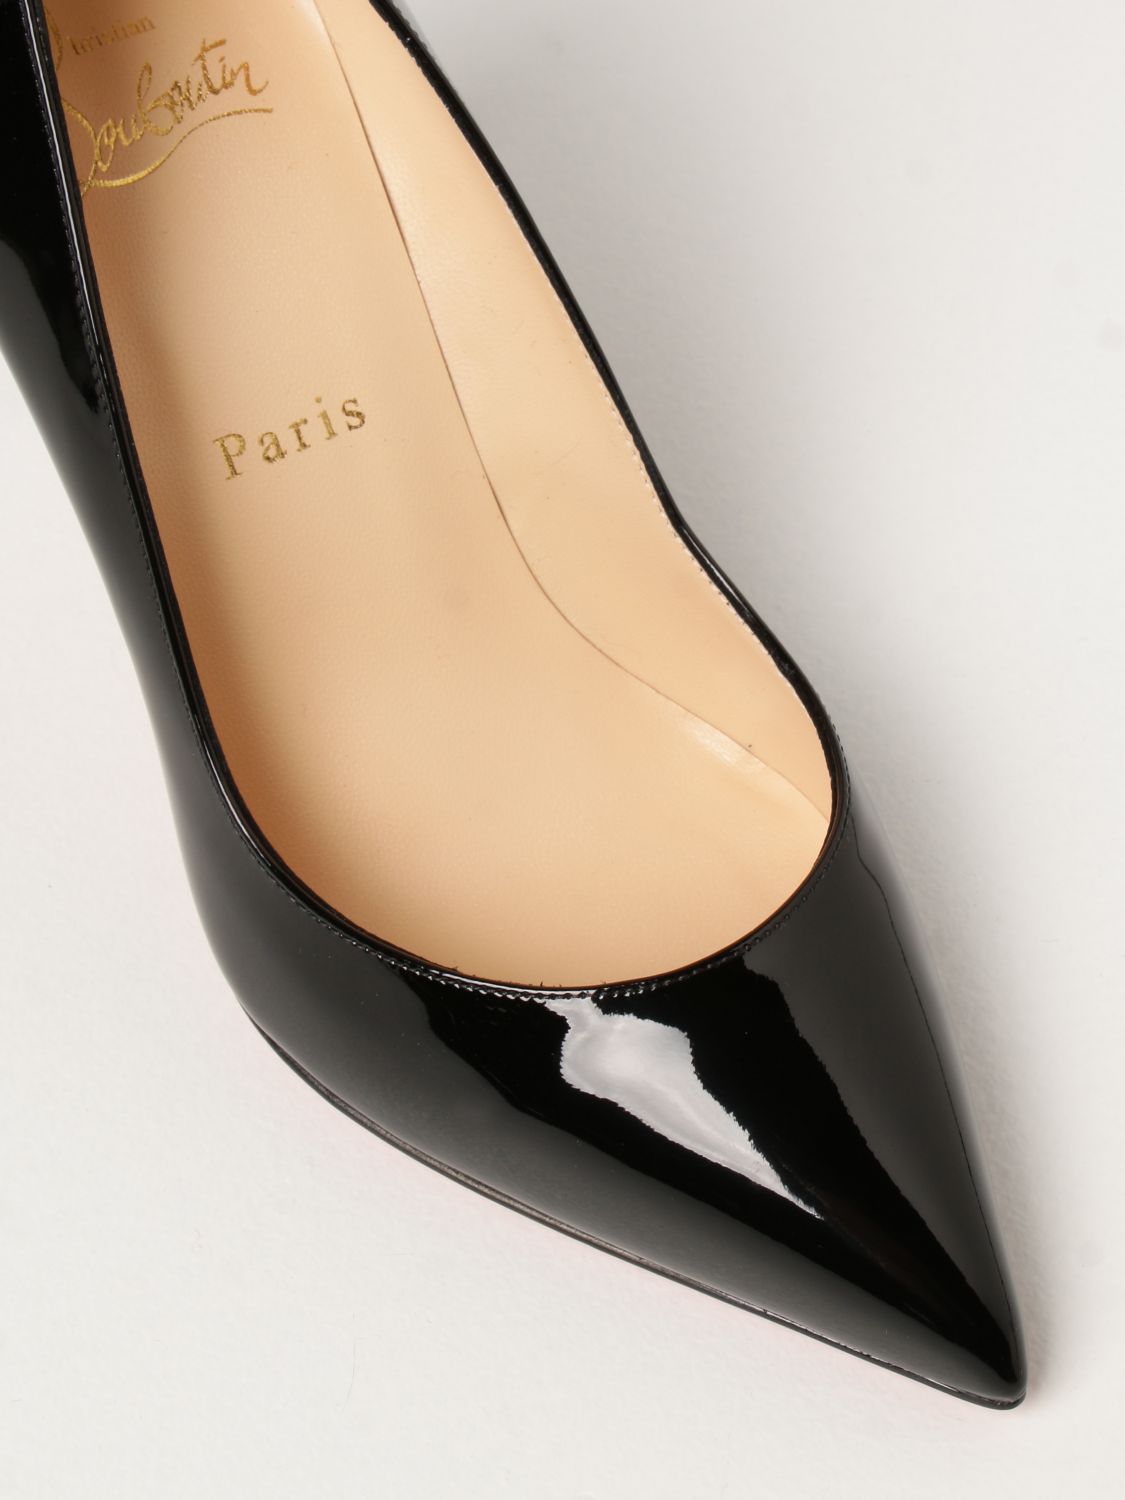 LOUBOUTIN: pumps in patent leather | Pumps Christian Louboutin Women Black | Christian Louboutin GIGLIO.COM